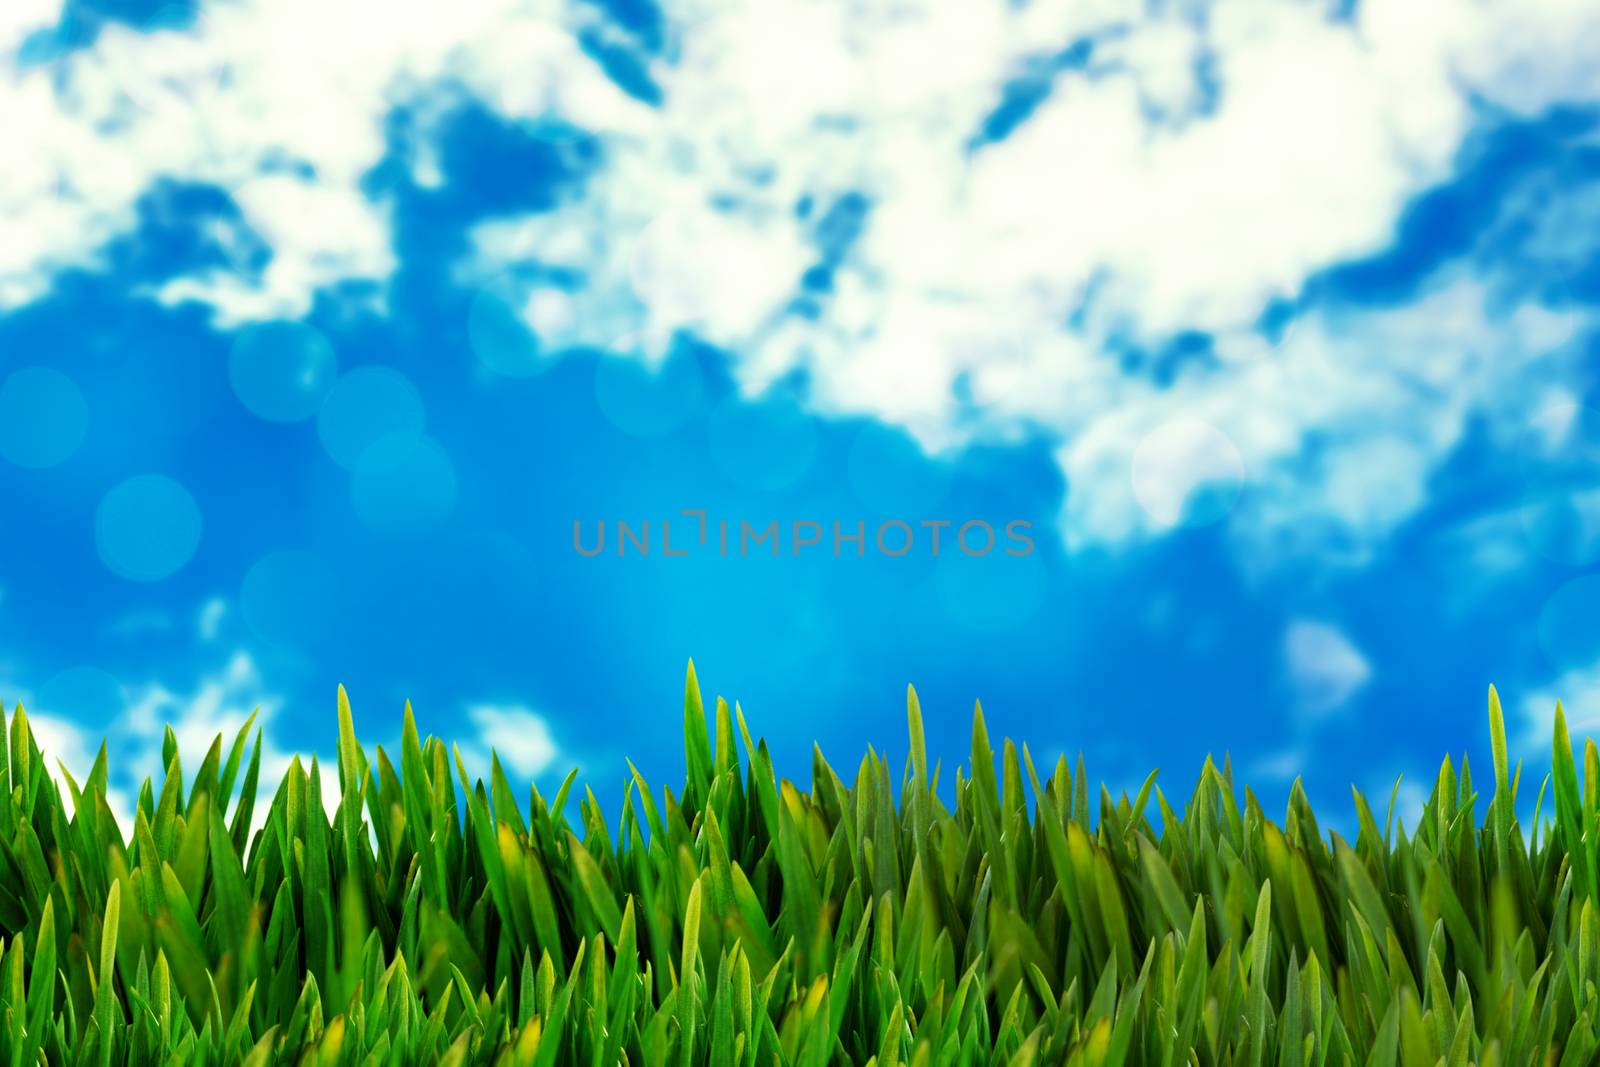 Grass growing outdoors against view of beautiful sky and clouds